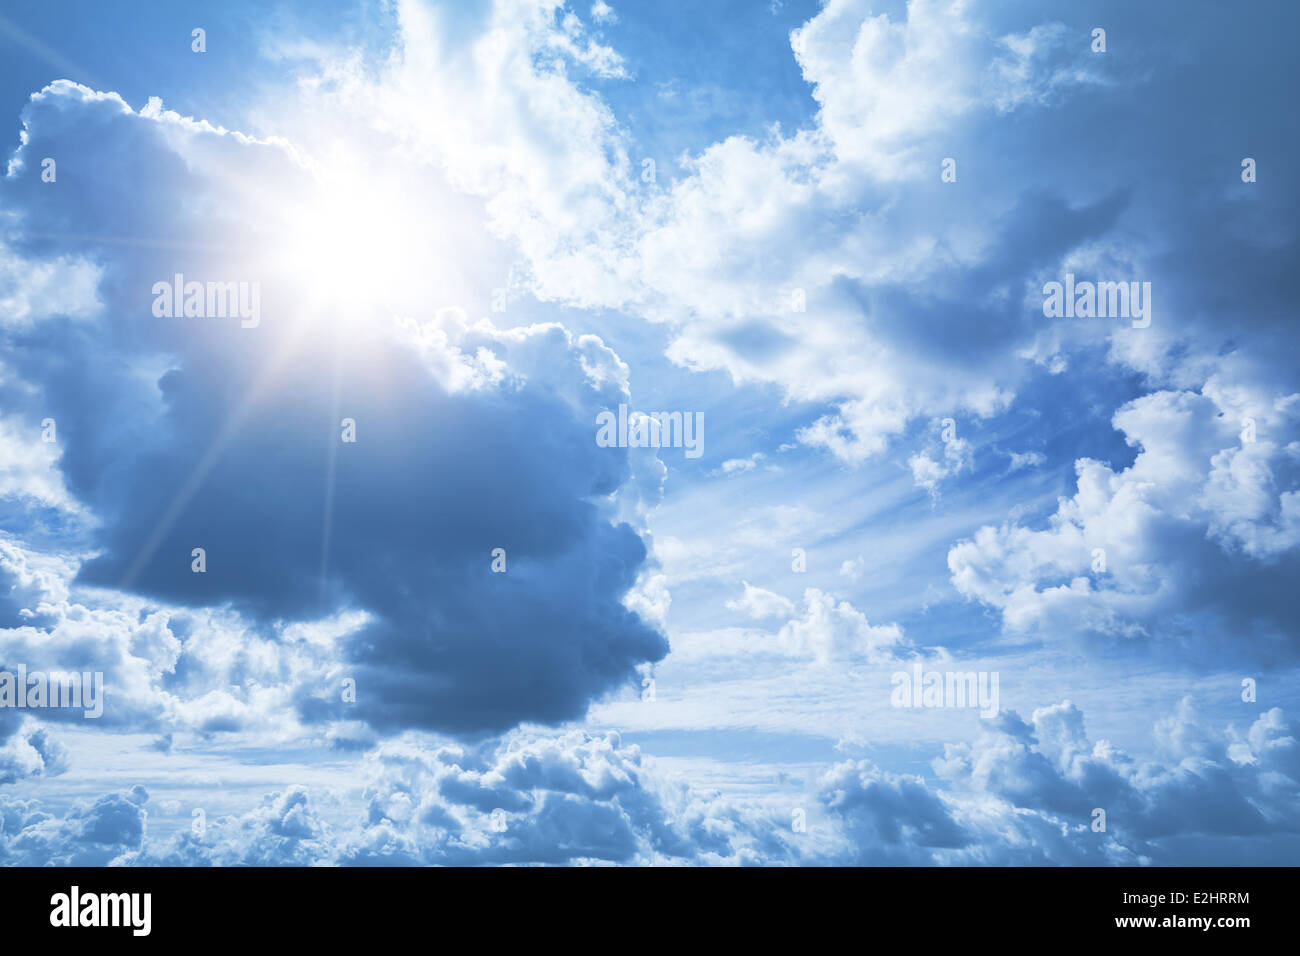 Bright blue sky background with white clouds and shining sun Stock Photo